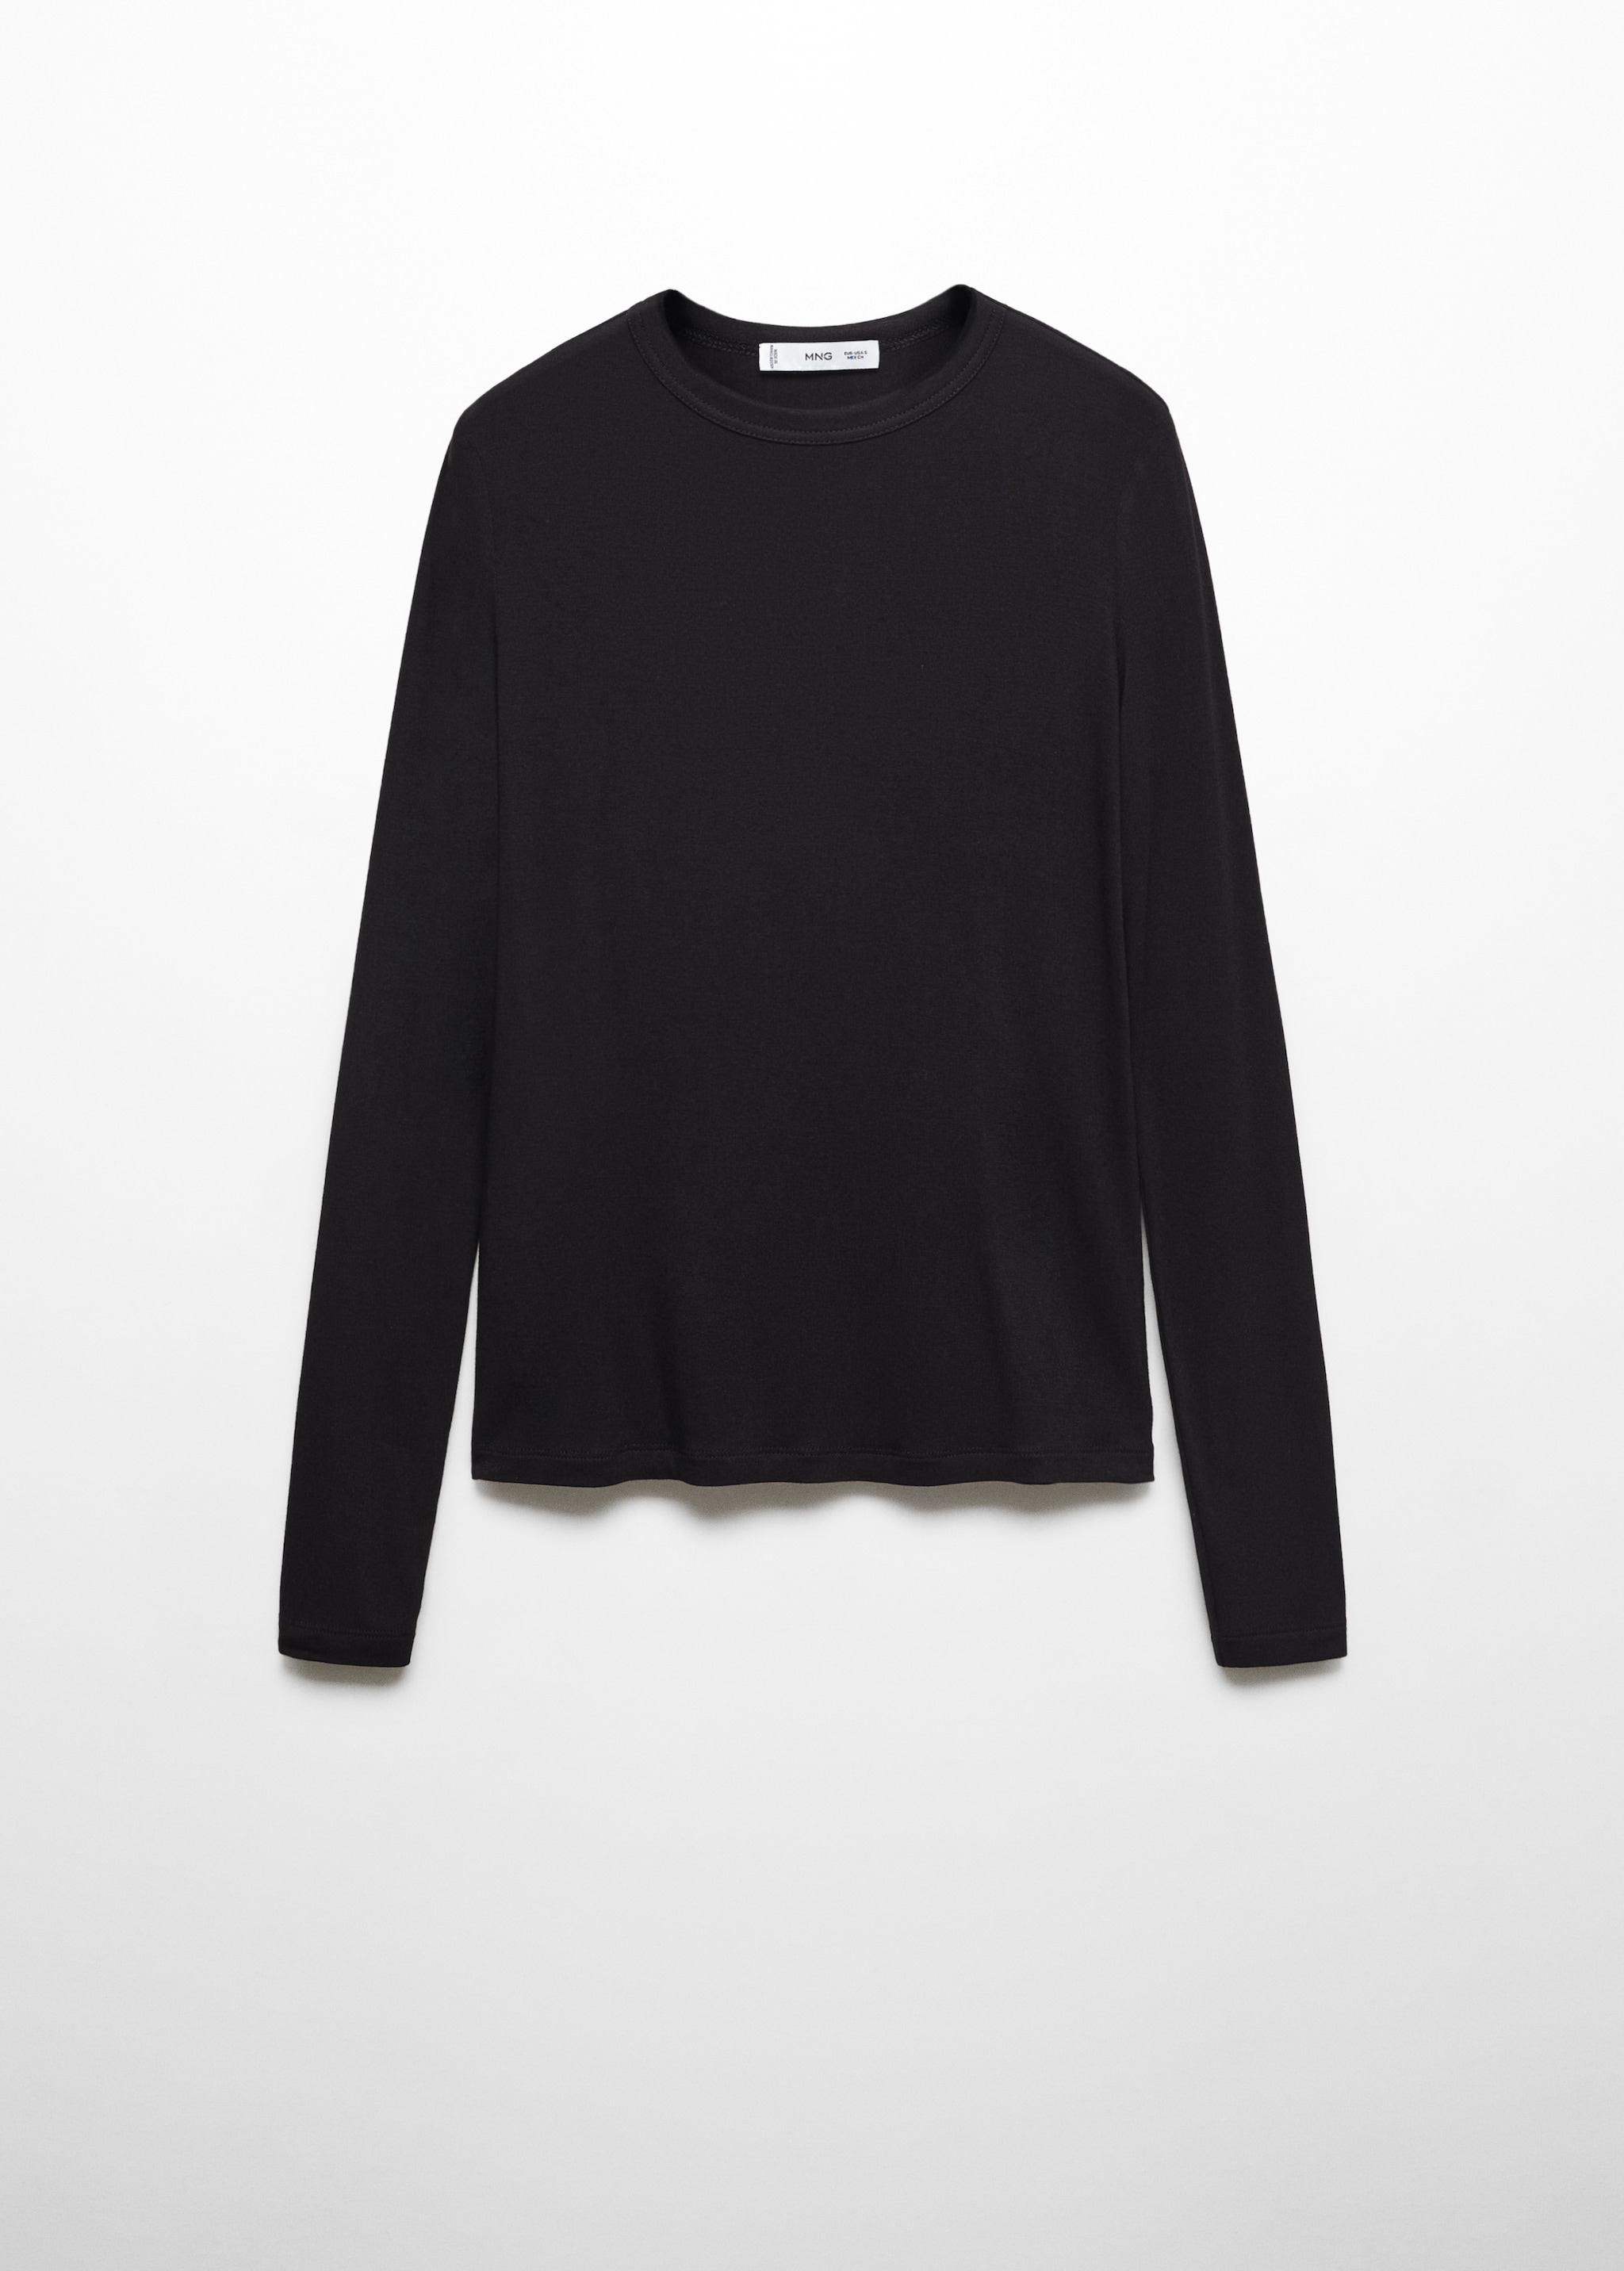 Round-neck long-sleeved t-shirt - Article without model